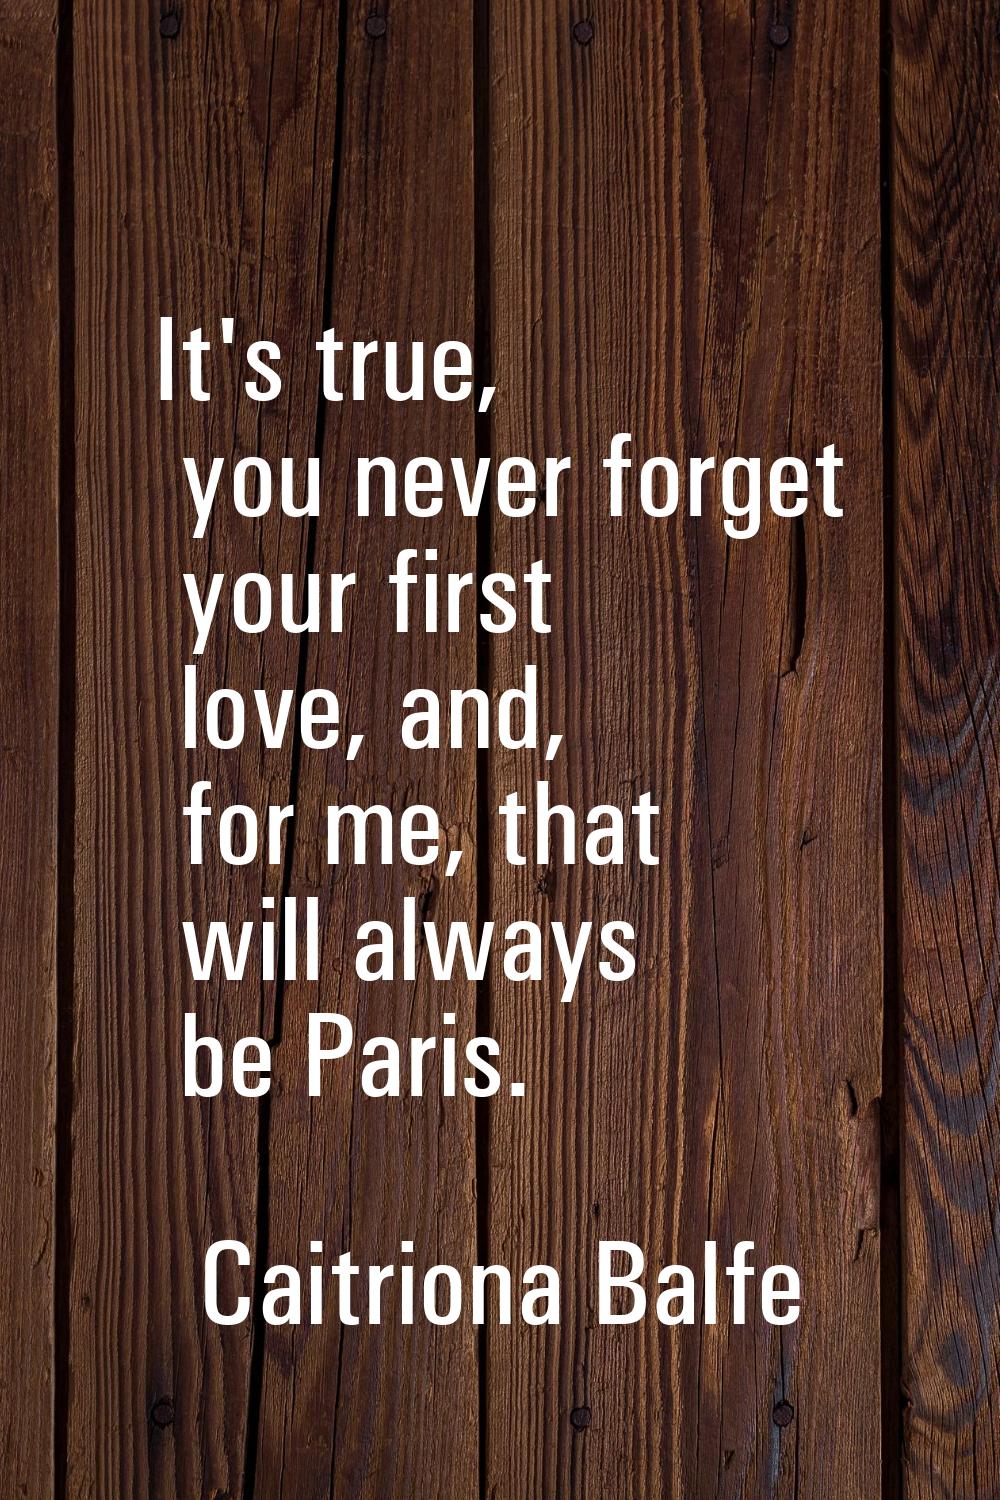 It's true, you never forget your first love, and, for me, that will always be Paris.